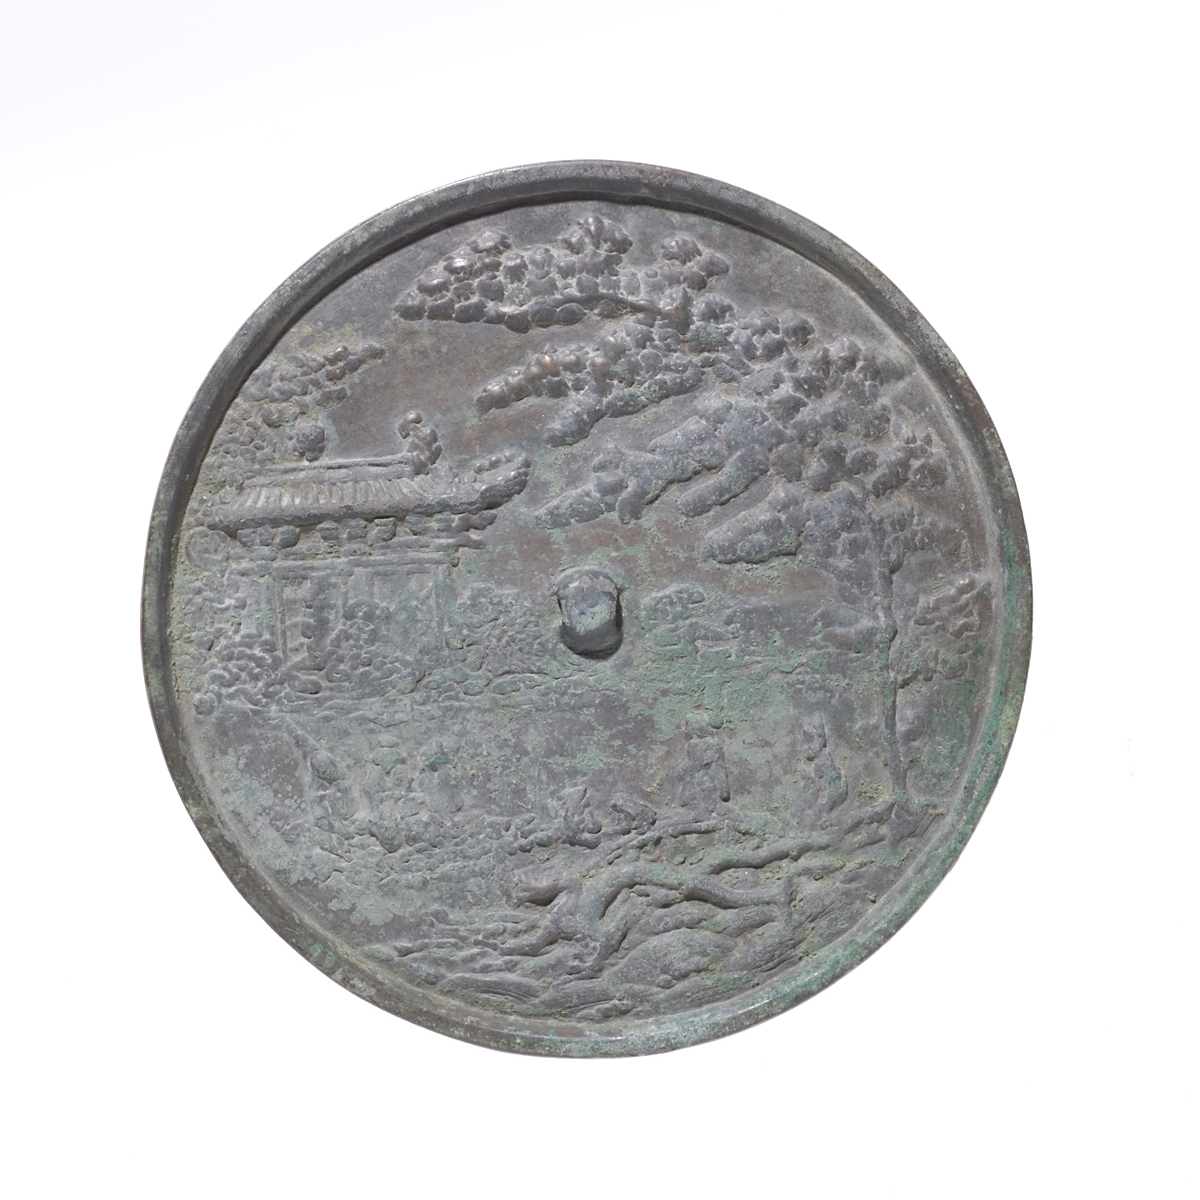 mirror depicting Emperor Xuanzong’s Journey to the Moon